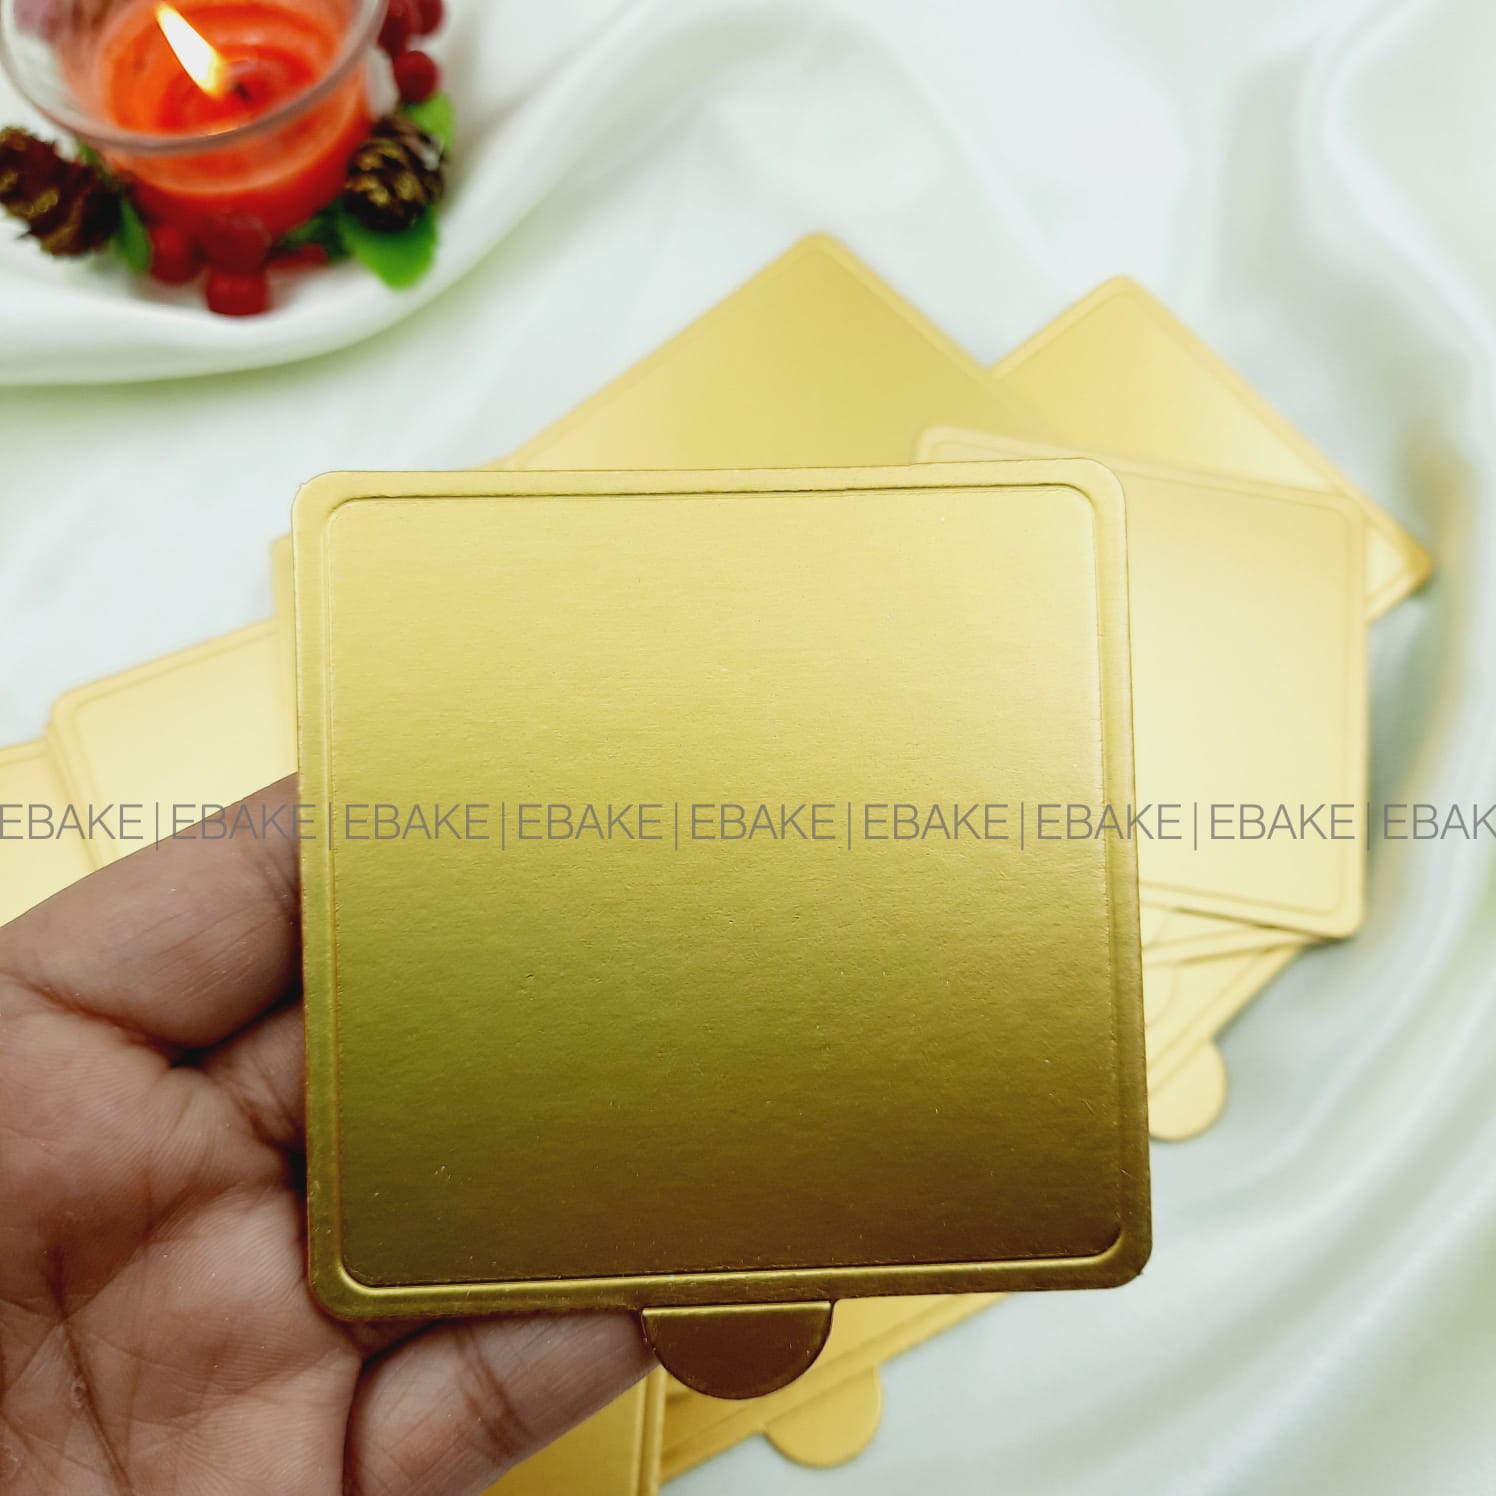 O'creme Cake Board, Gold Foil Square Cake Drum With Gorgeous Design, Pack  Of 5 Disposable Cake Drums : Target